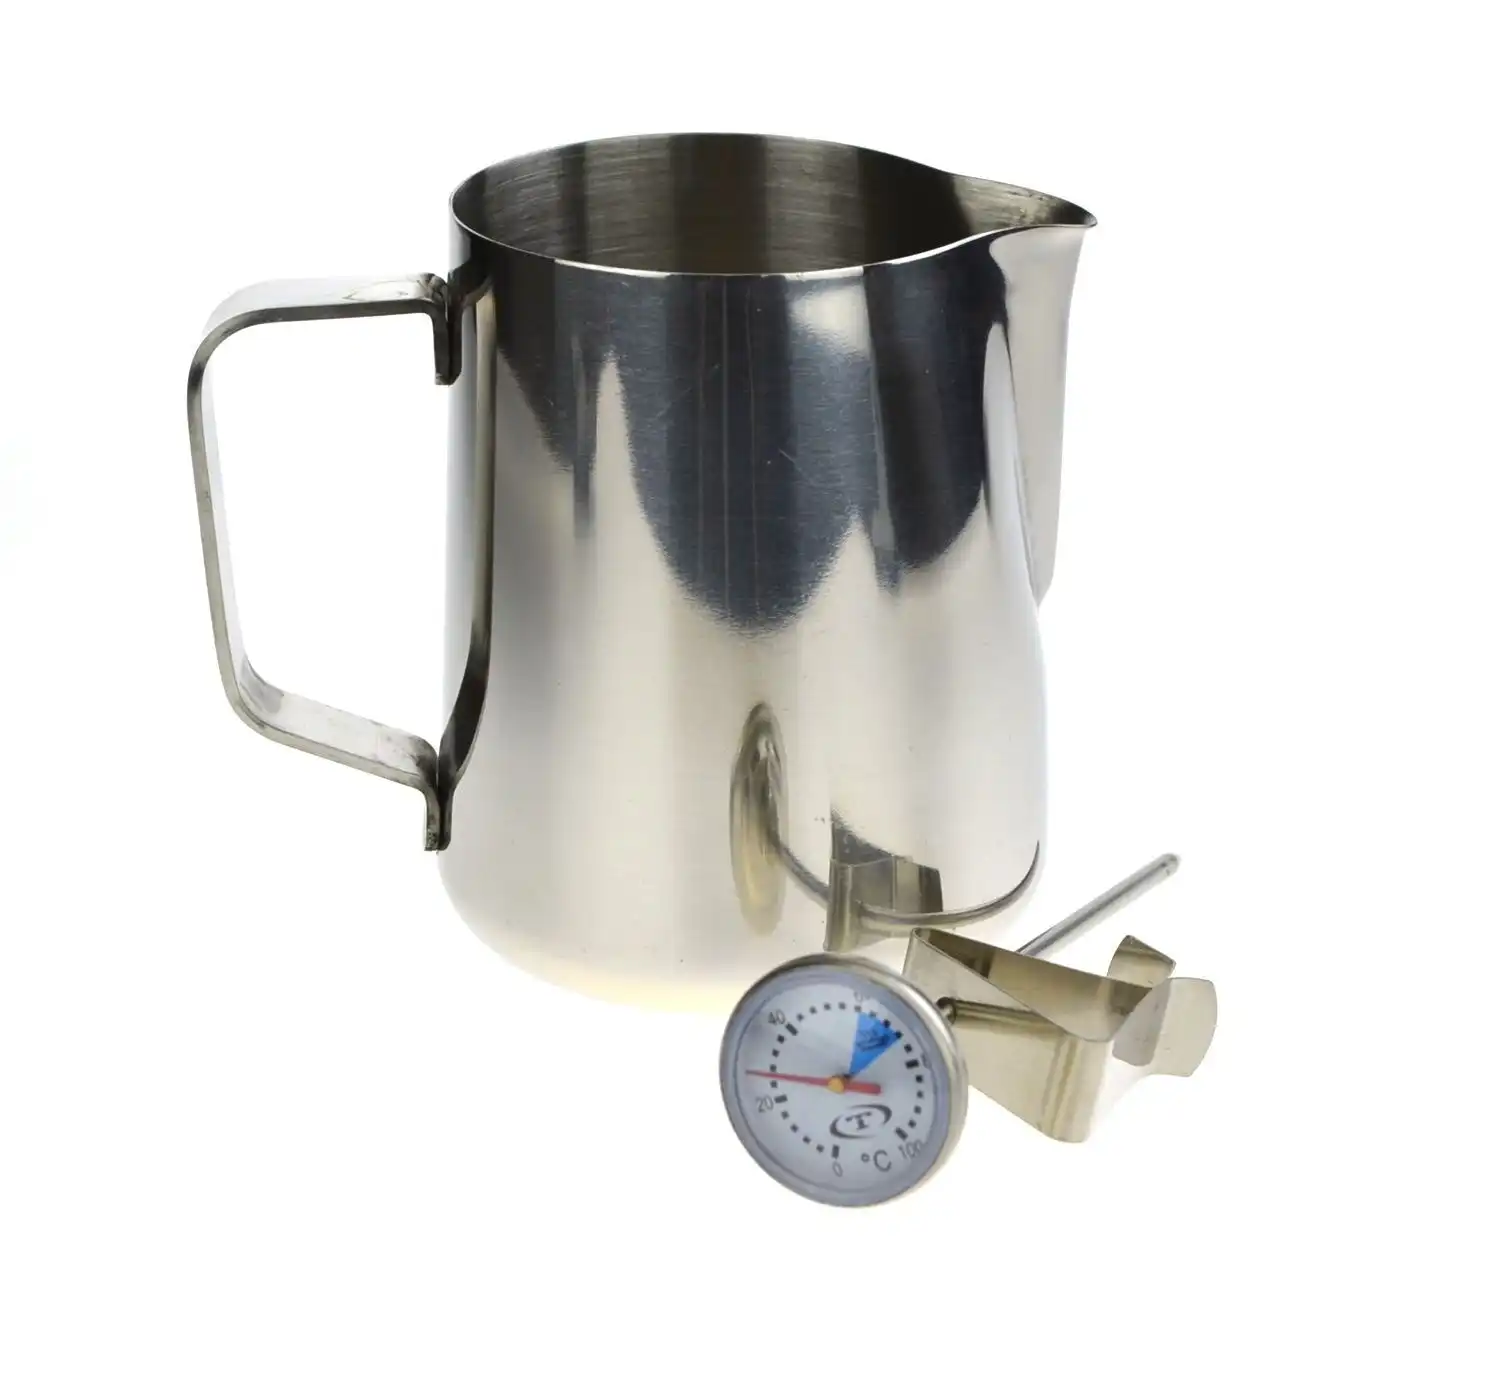 600ml MILK JUG AND THERMOMETER SET